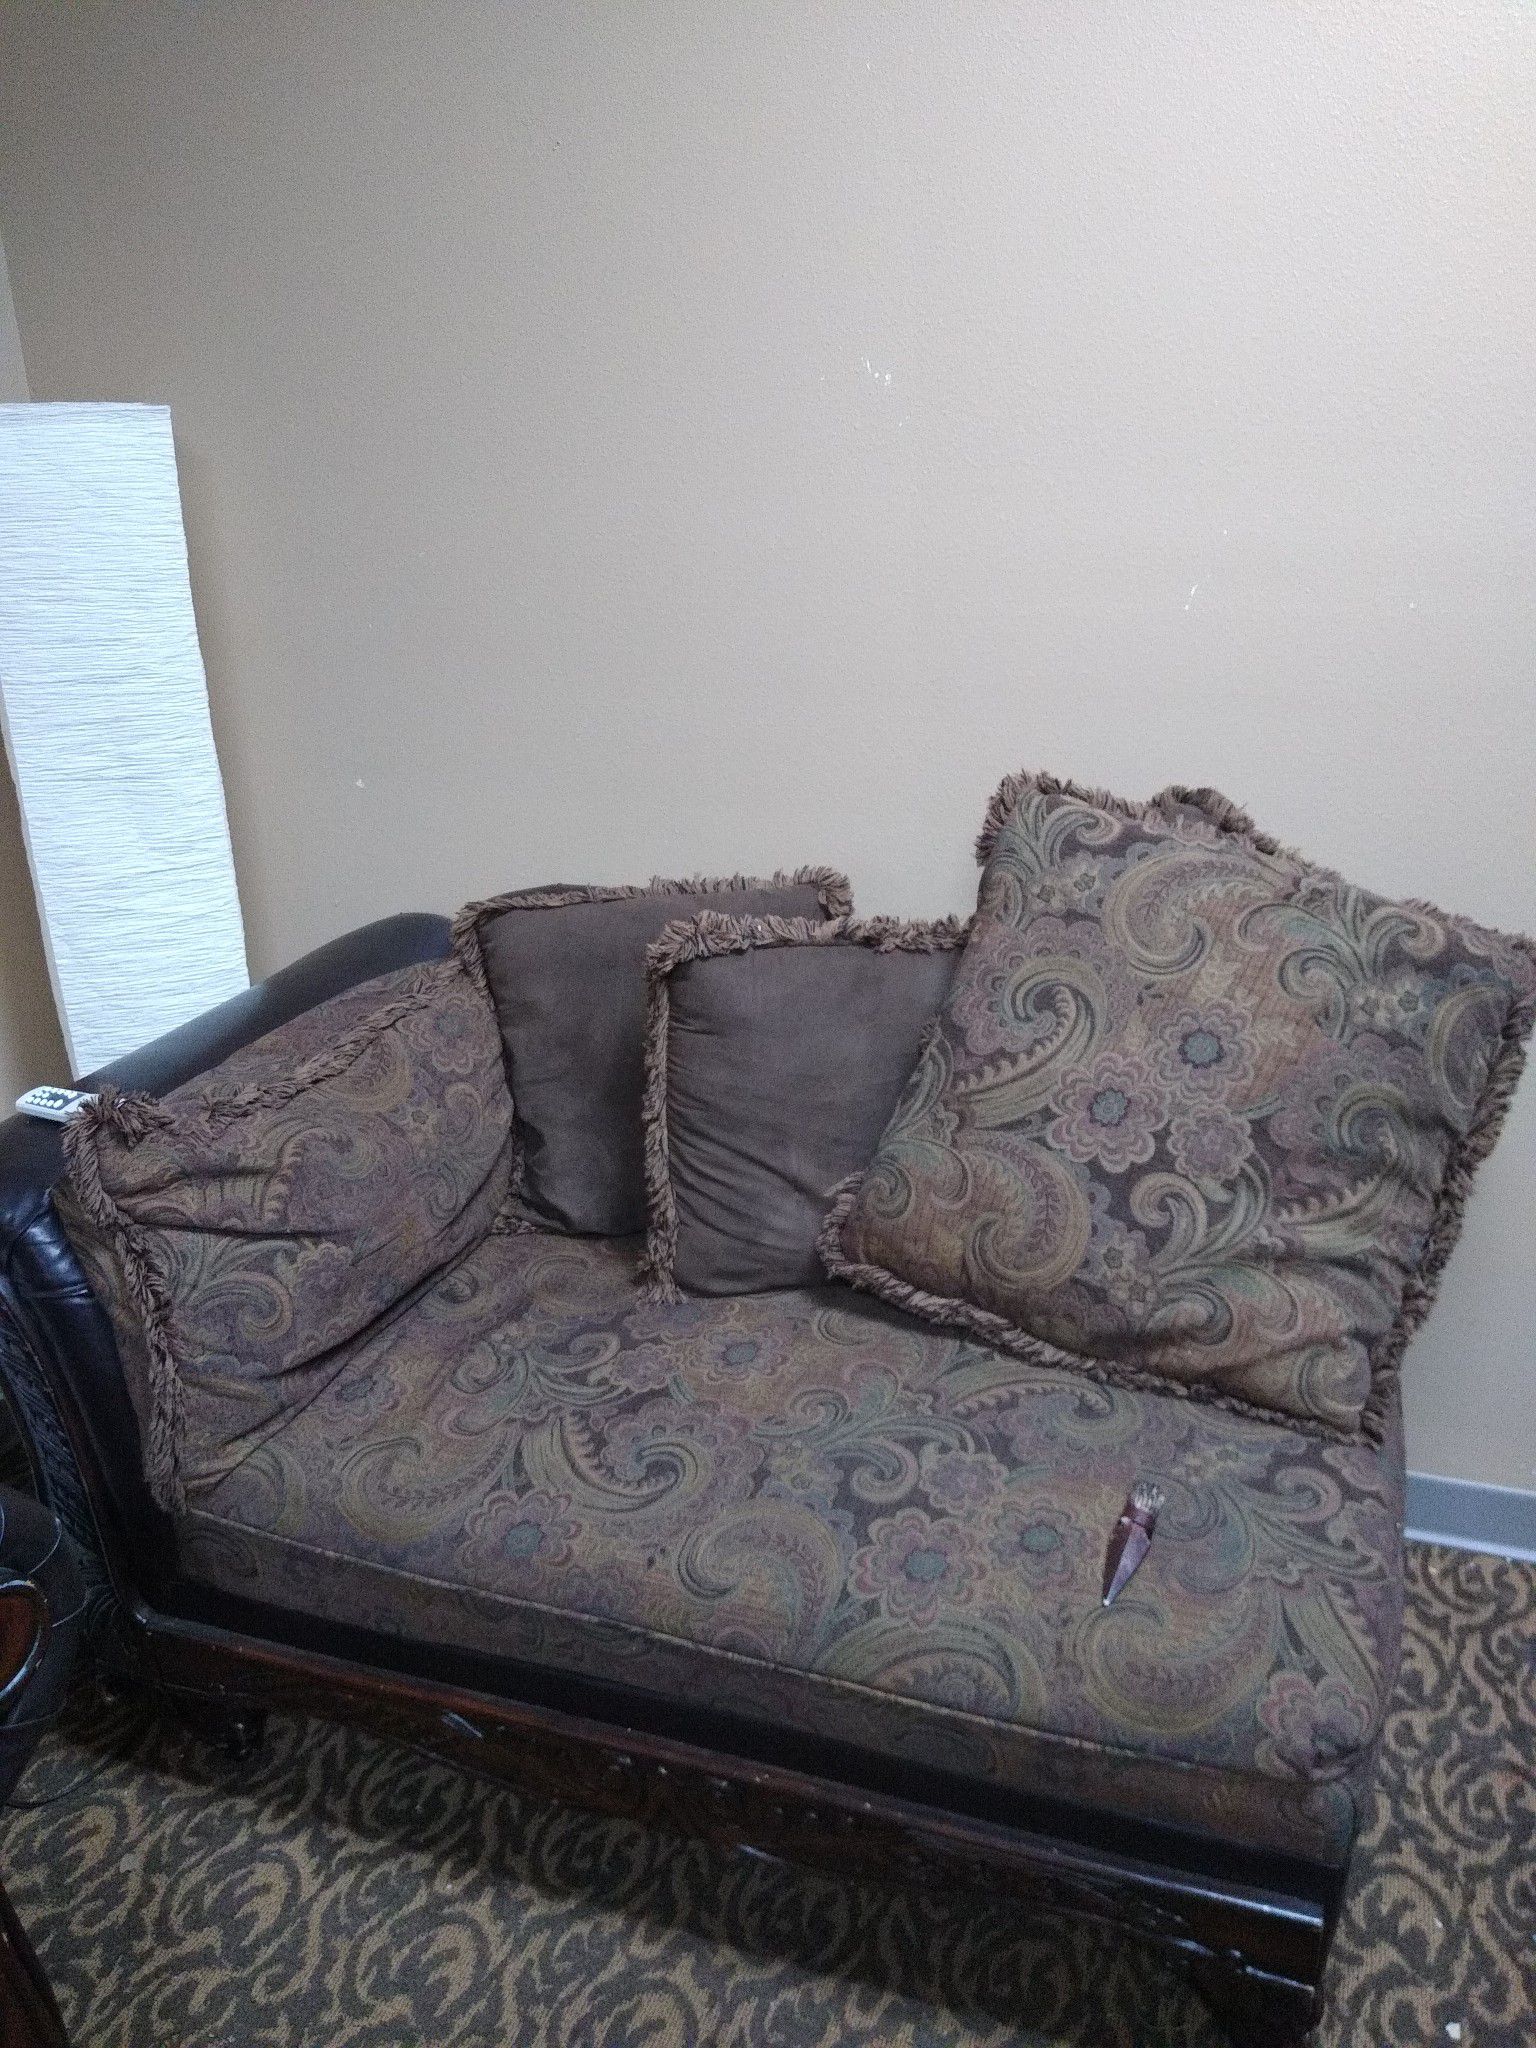 Couch and chaise FREE IF PICKED UP BY 1PM TONIGHT